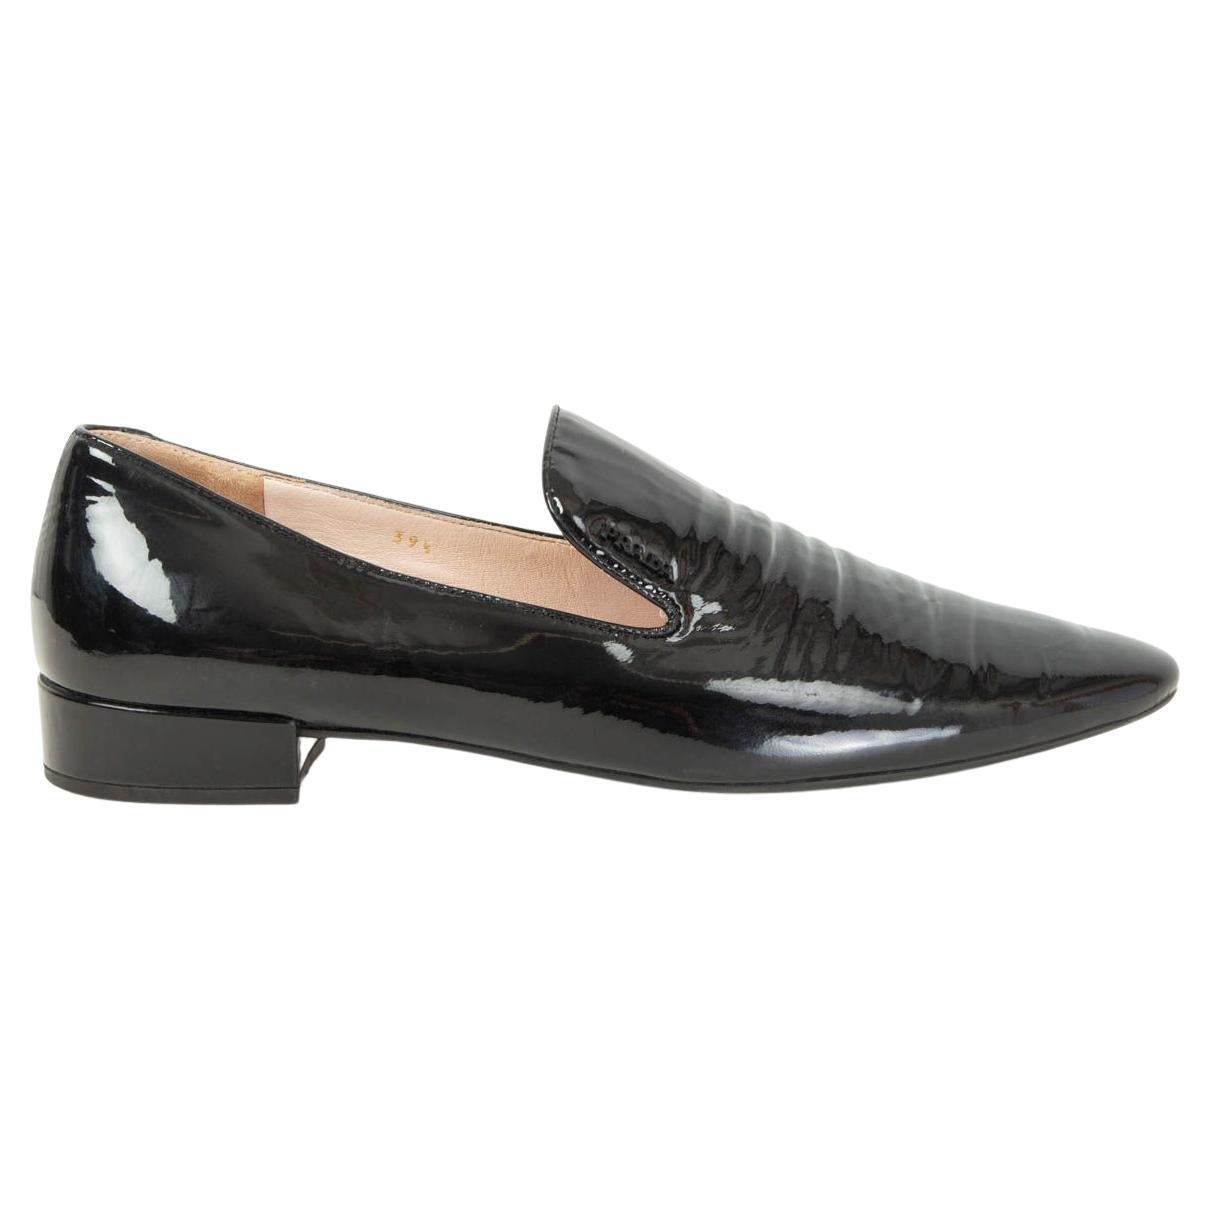 PRADA black patent leather Loafers Shoes 39.5 For Sale